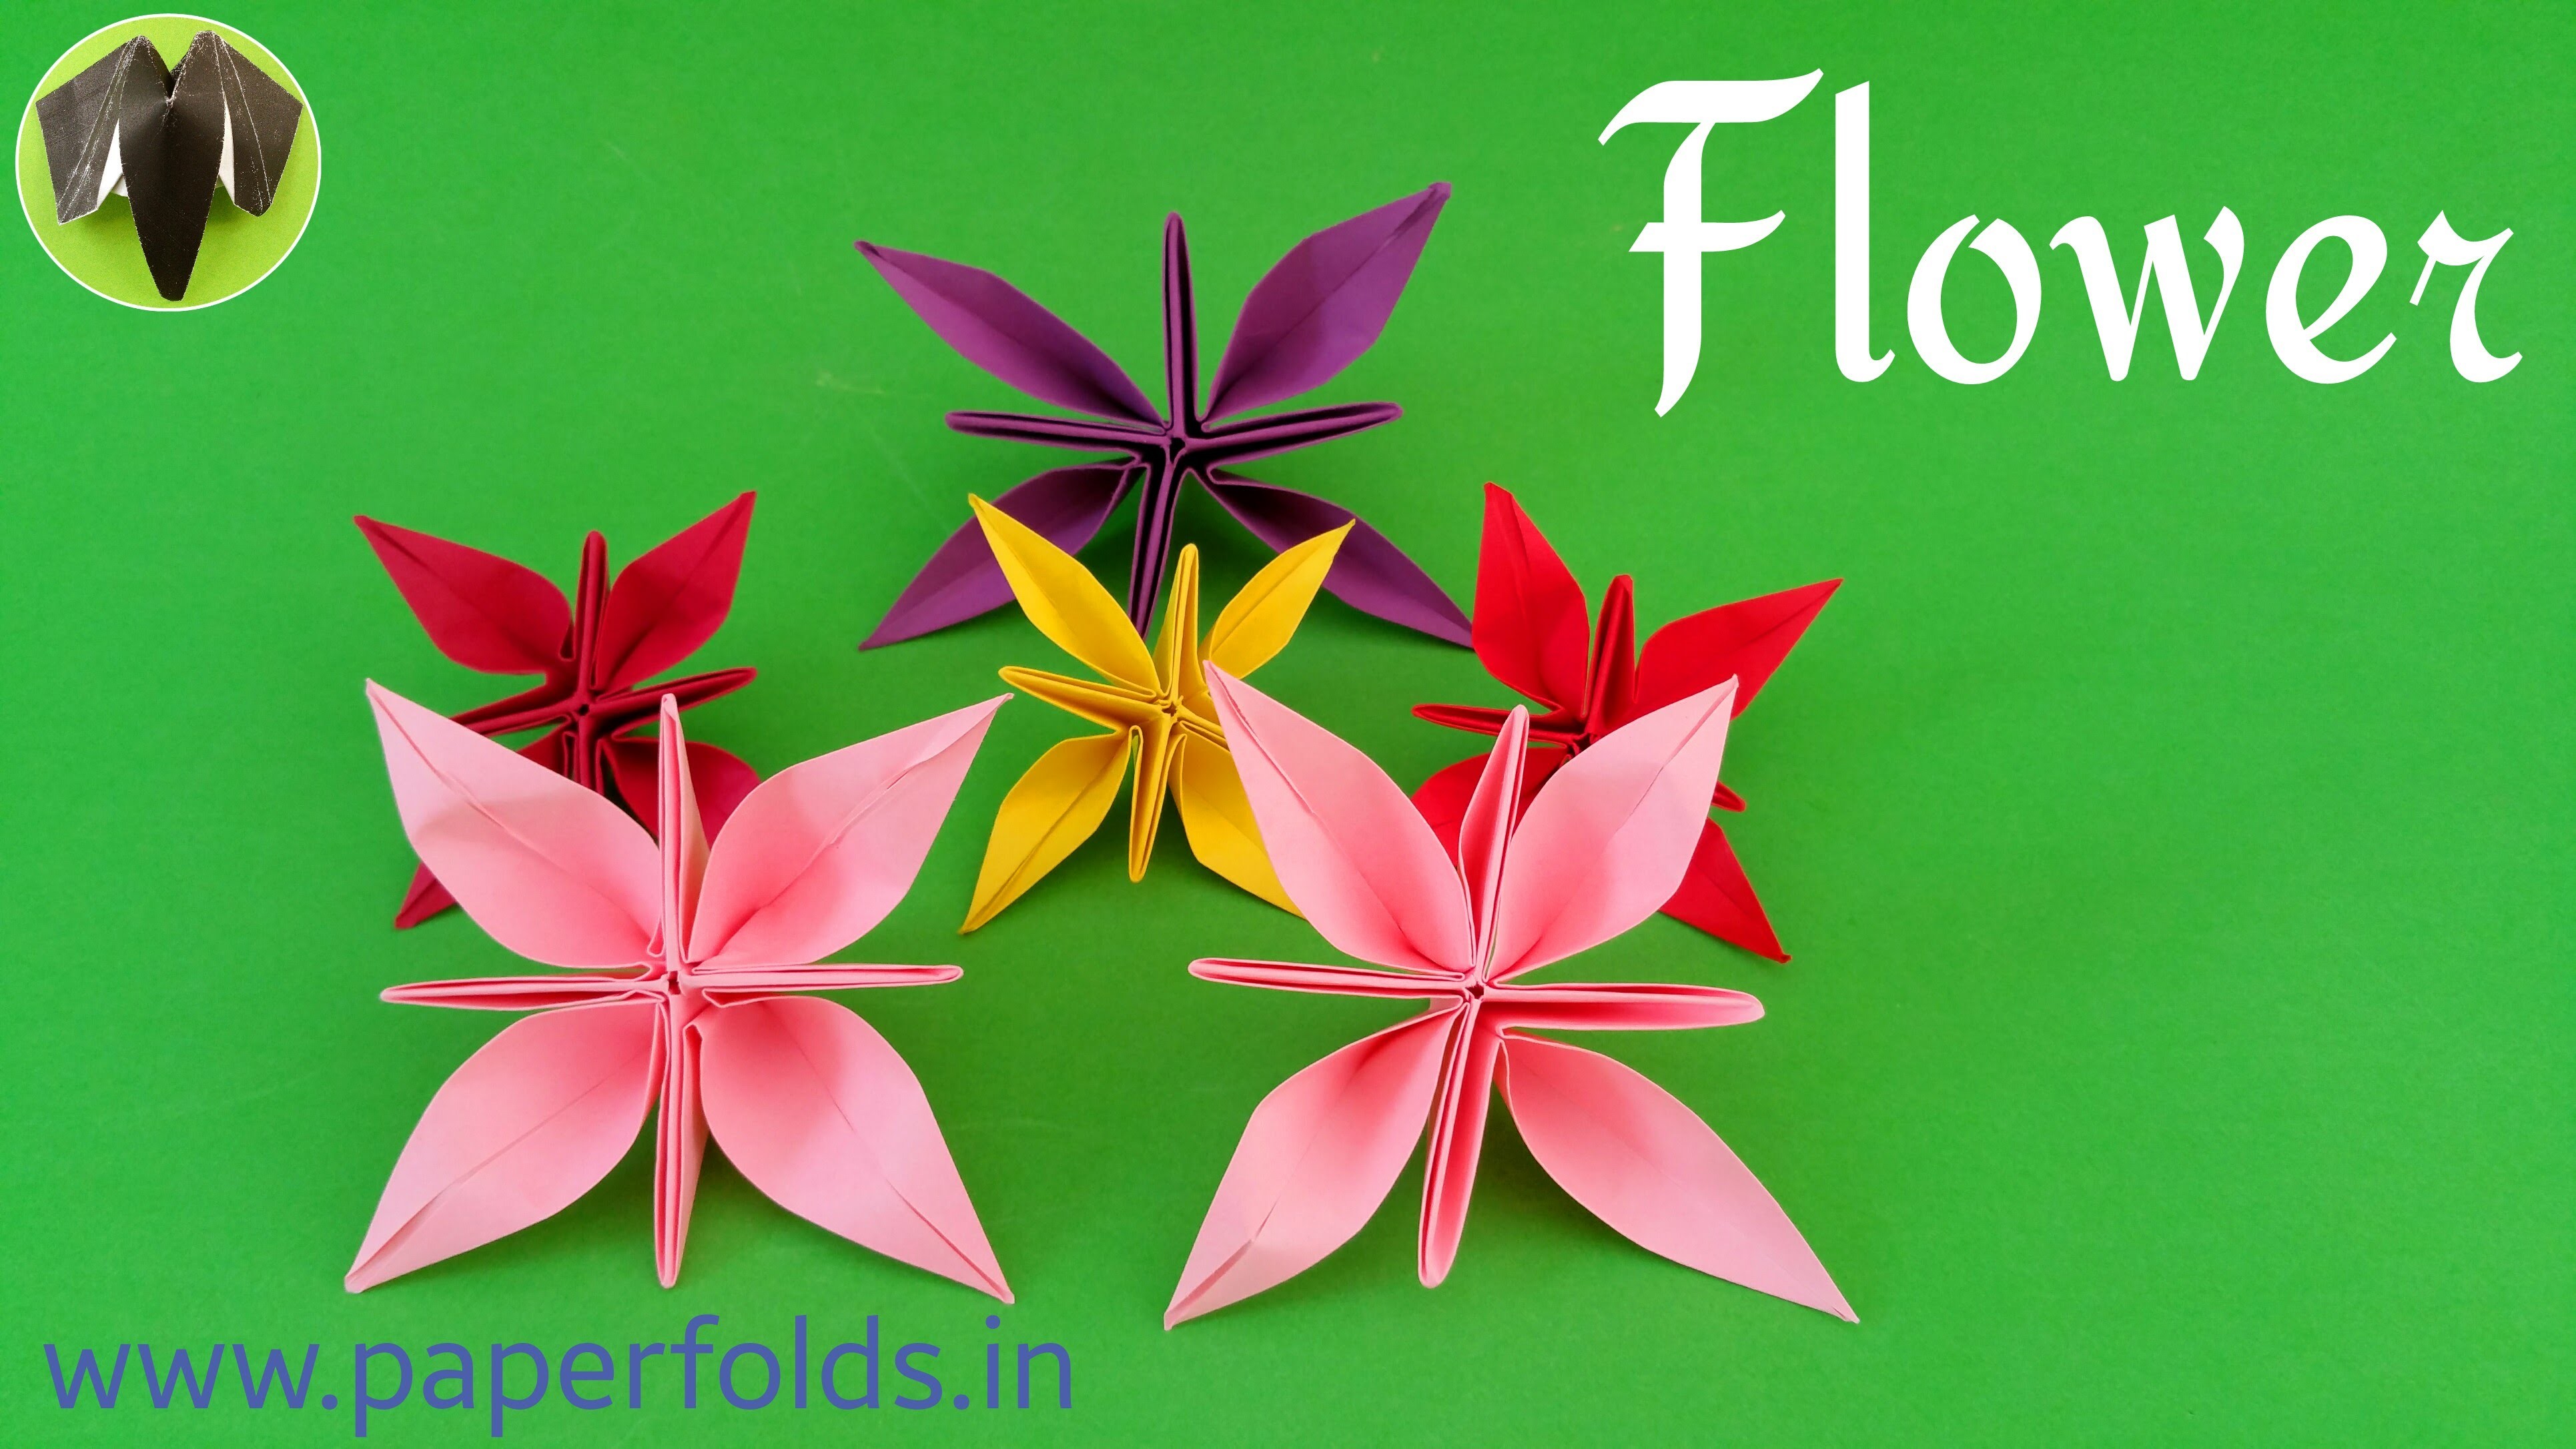 Origami tutorial to make a beautiful Paper "Flower"